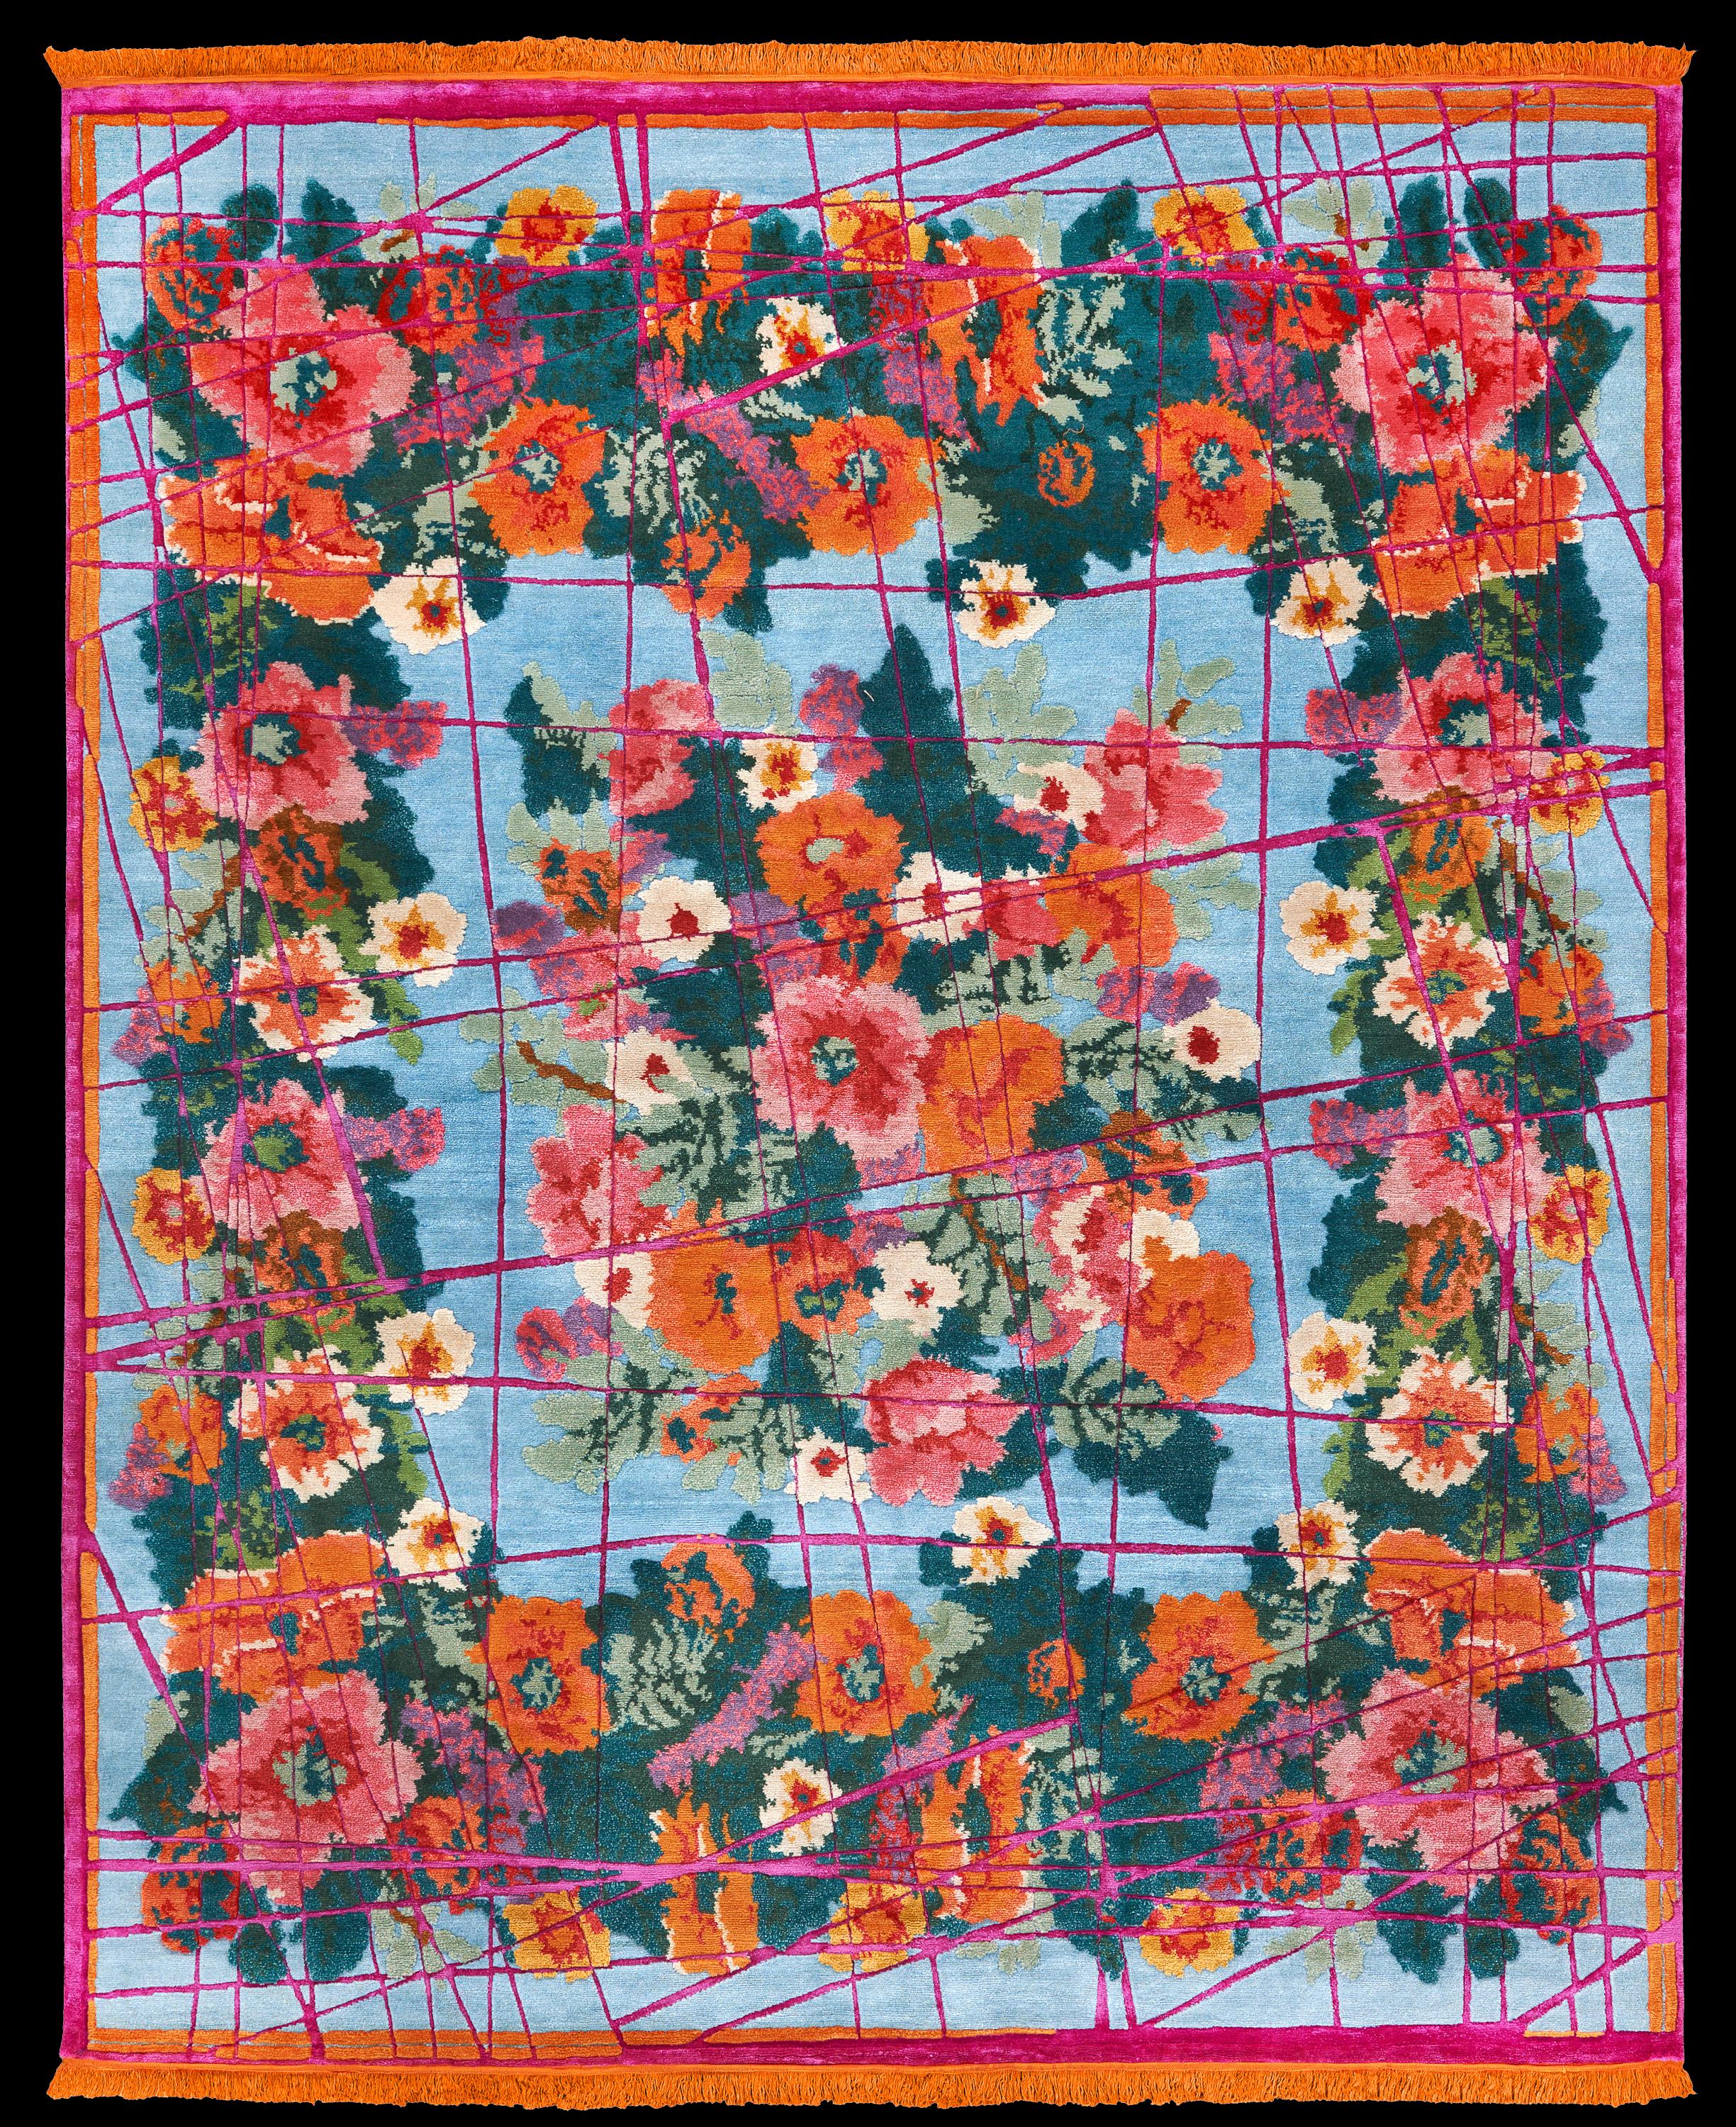 Designed by Jan Kath, this hand knotted rug is from a collection inspired by carpets made in Karabagh and other provinces in southern Russia, circa 1900. The patterns are created using rich, bright colors of Tibetan highland wool and Chinese silk,